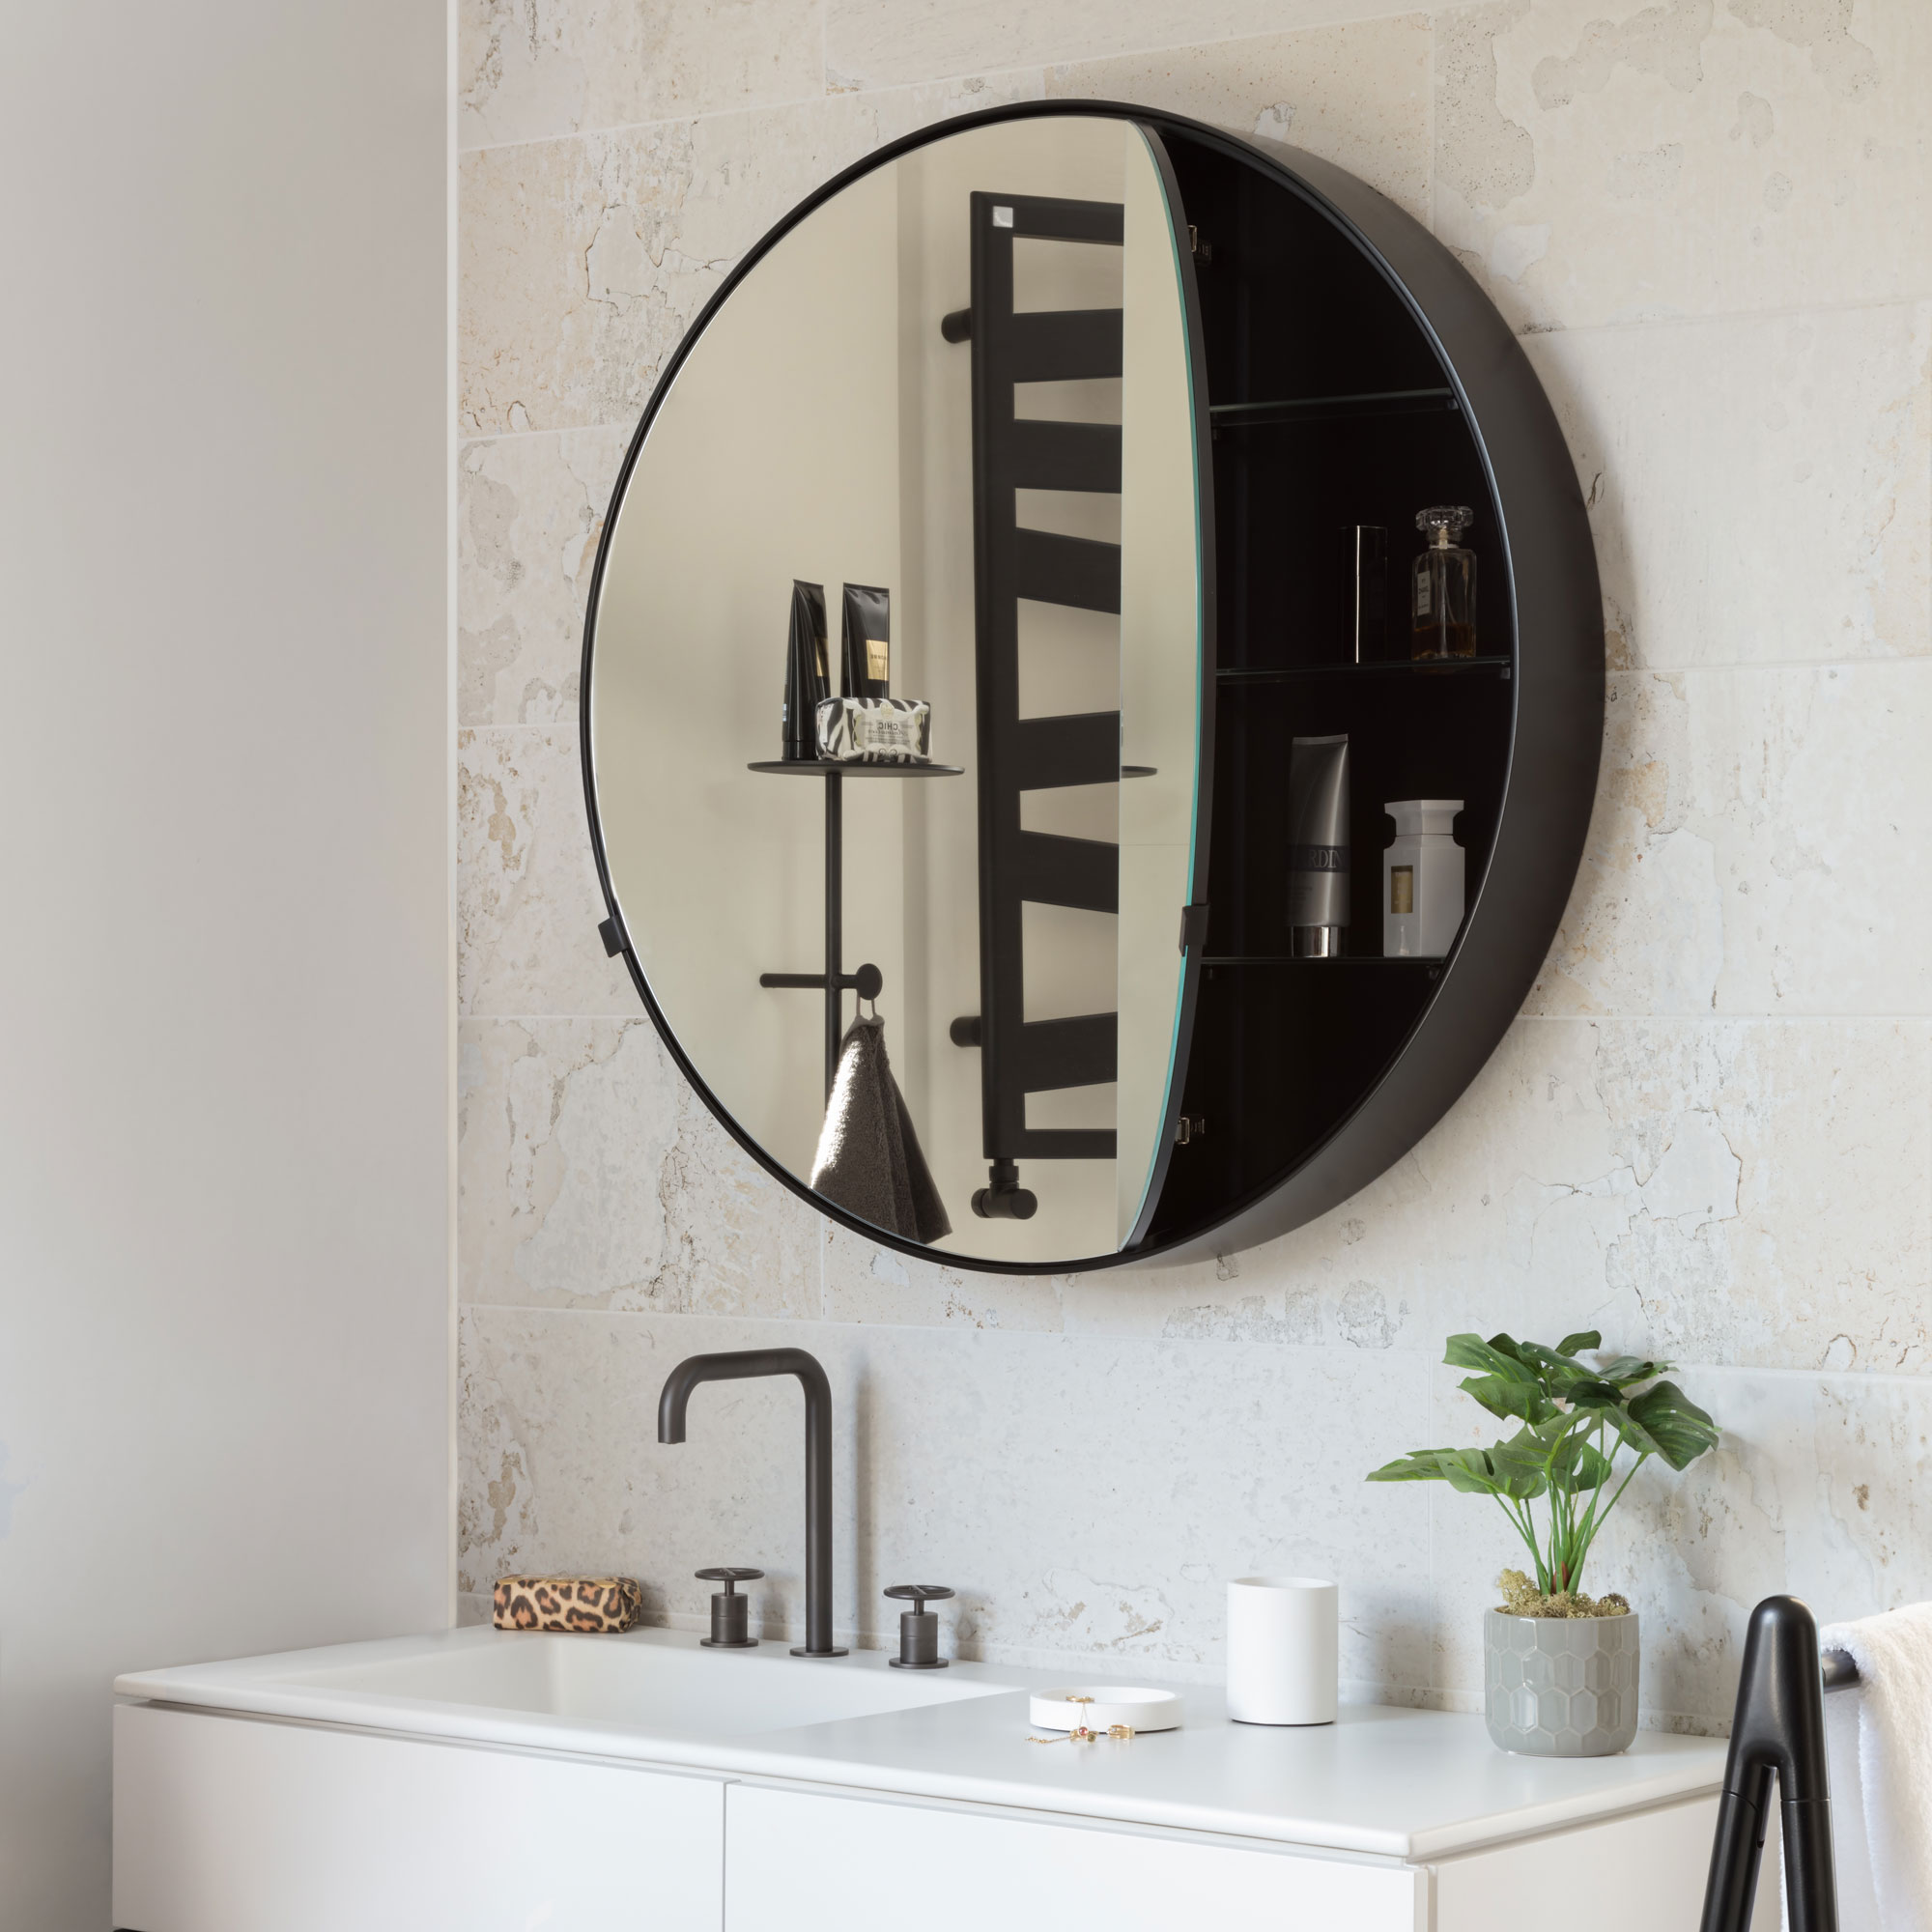 I Catini Round Box Mirrors And Cabinets, Bathroom Cabinet With Circular Mirror